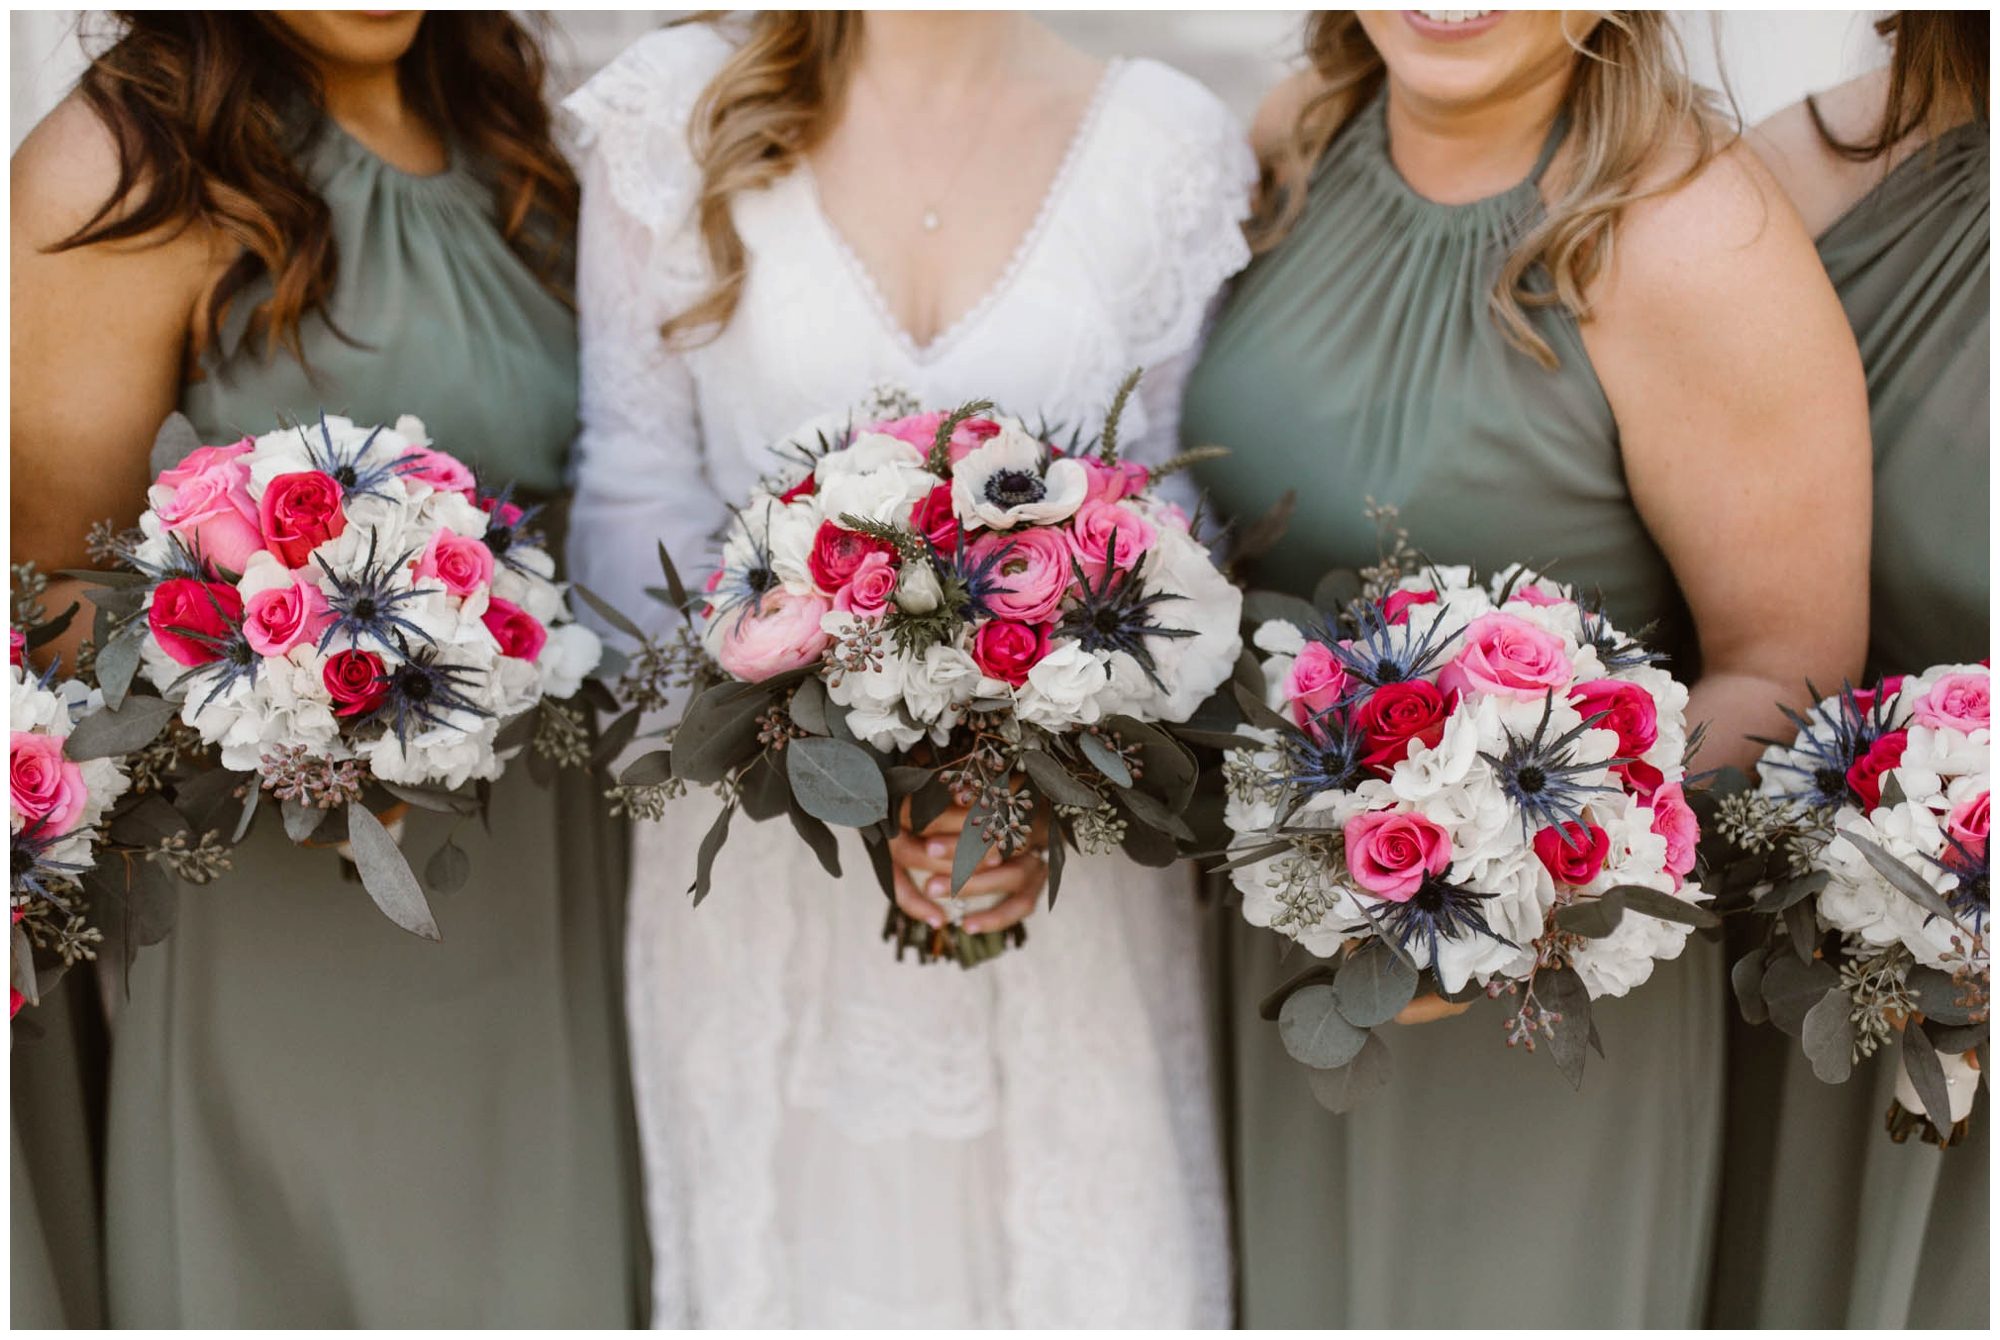 bride and bridesmaids holding white and pink bouquet from Lisa Foster Floral Design